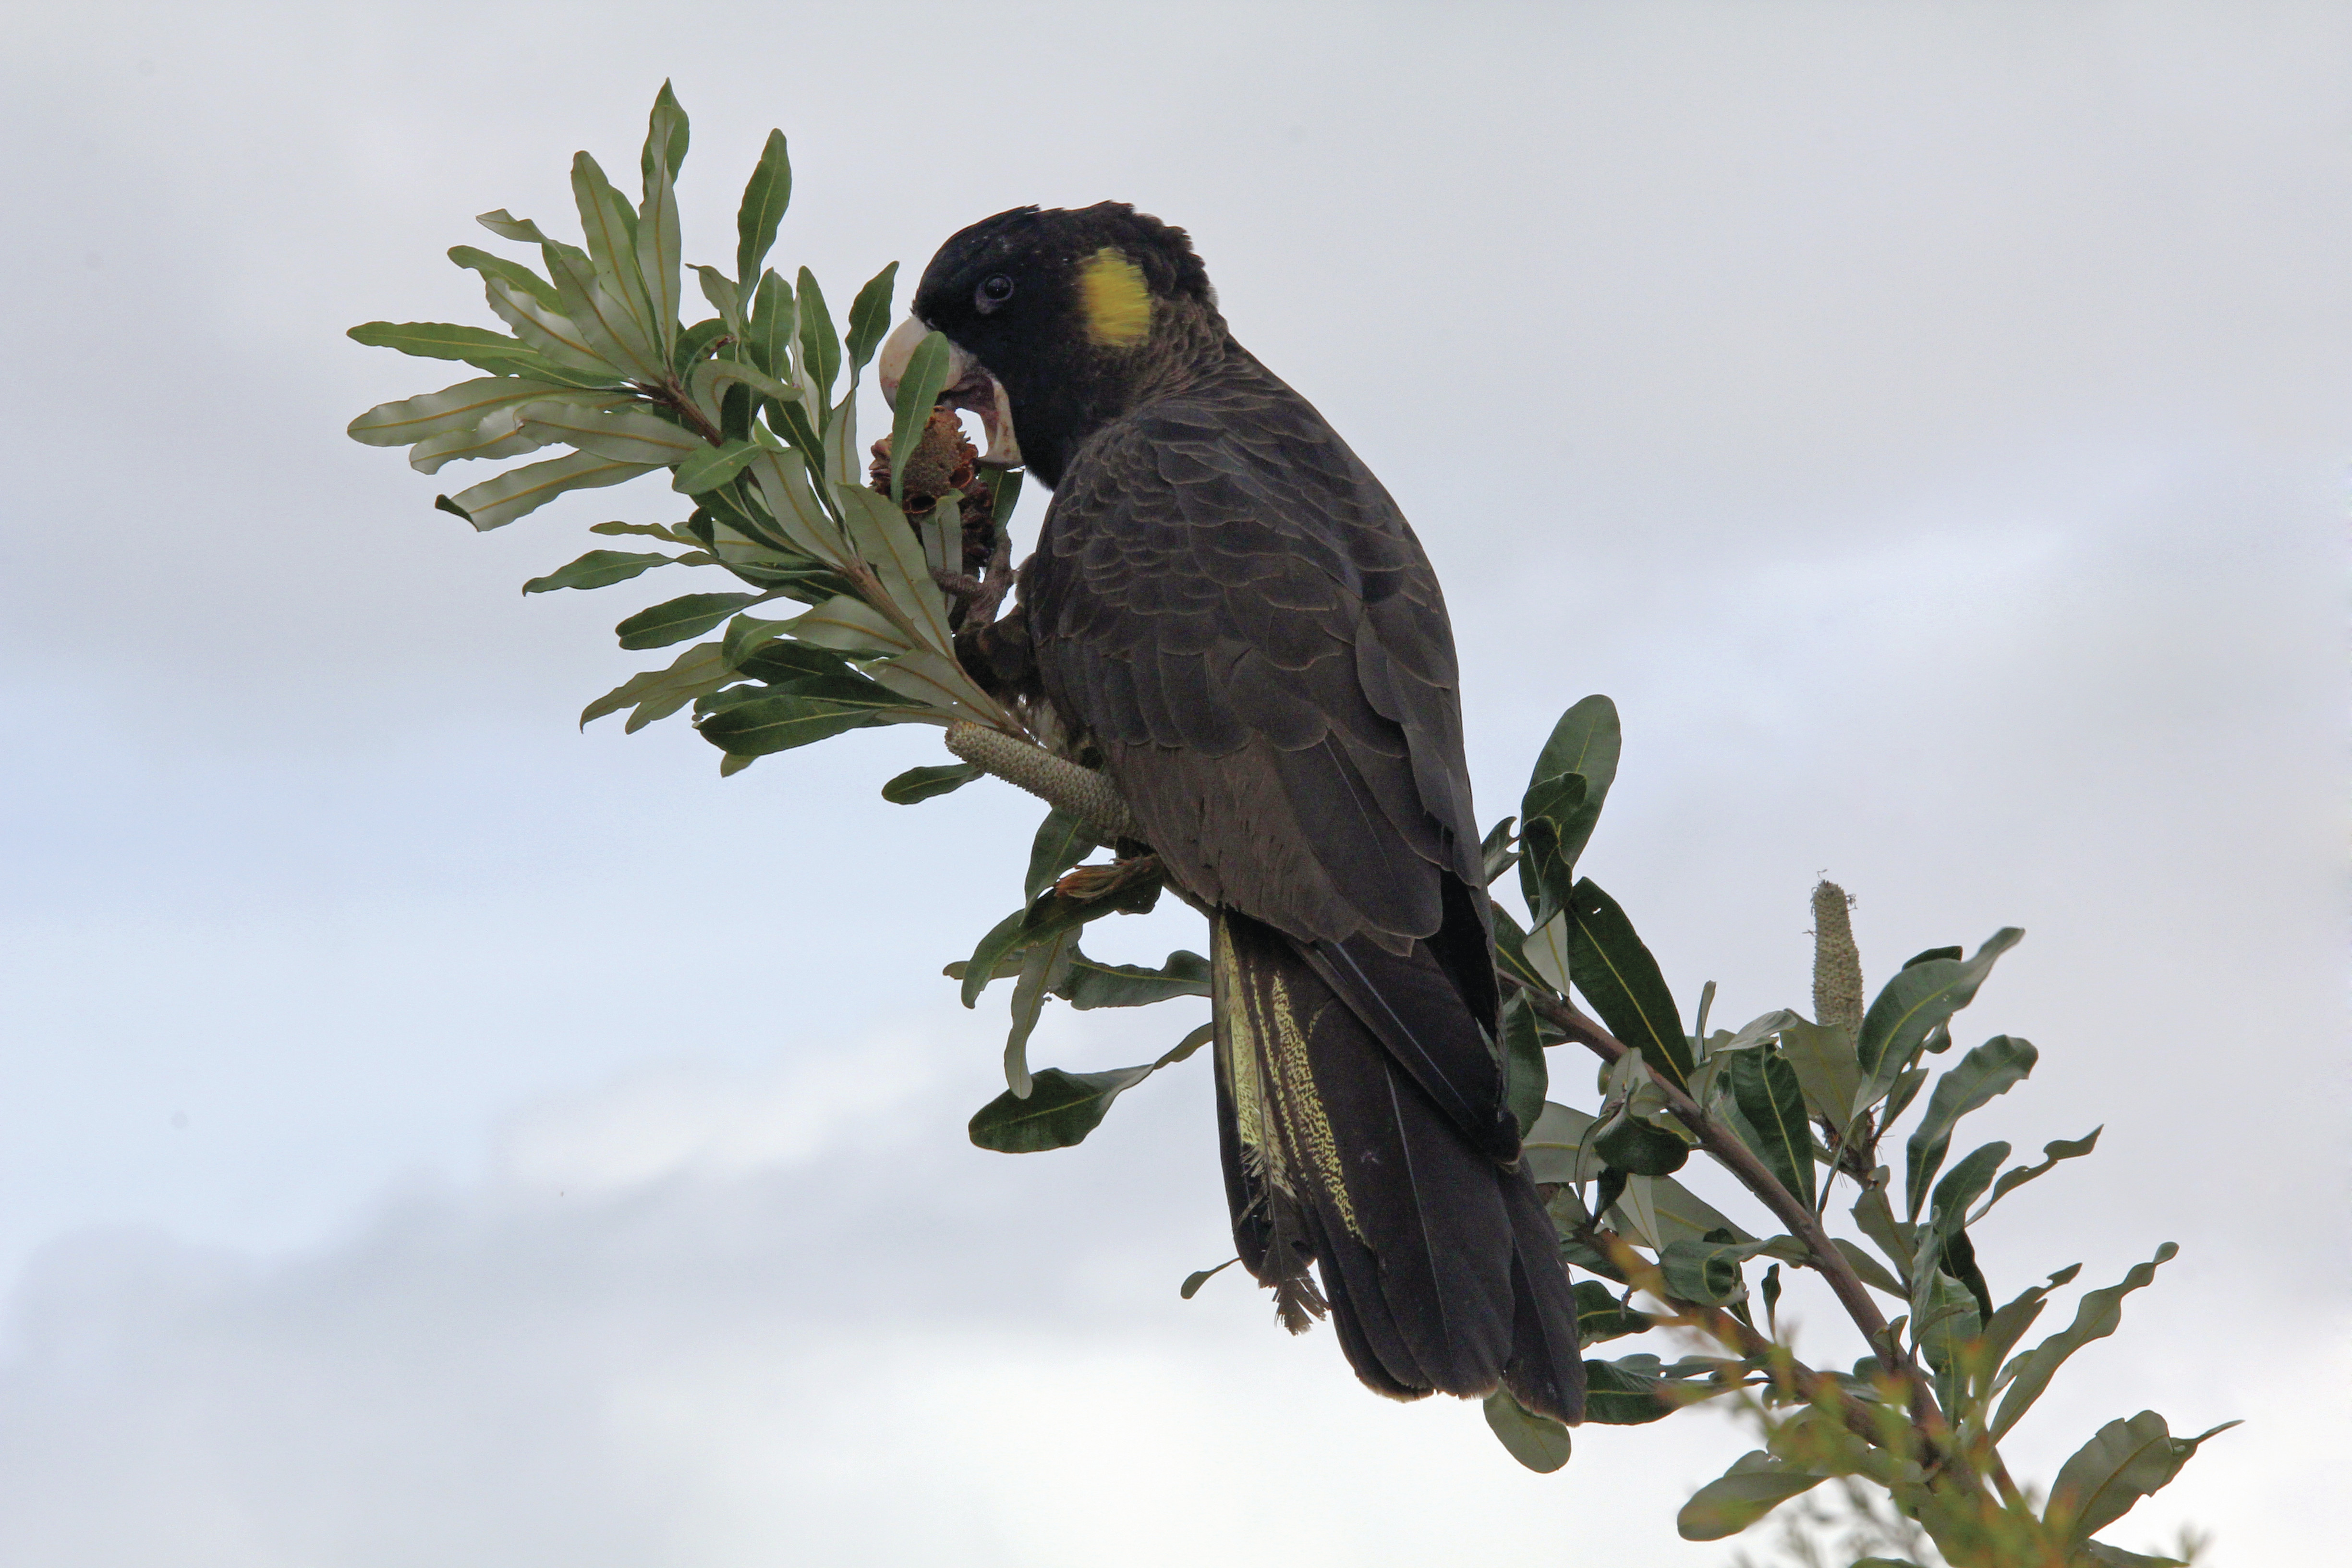 Yellow-tailed black cockatoo in a NSW national park. Photo: Peter Sherratt/DPIE